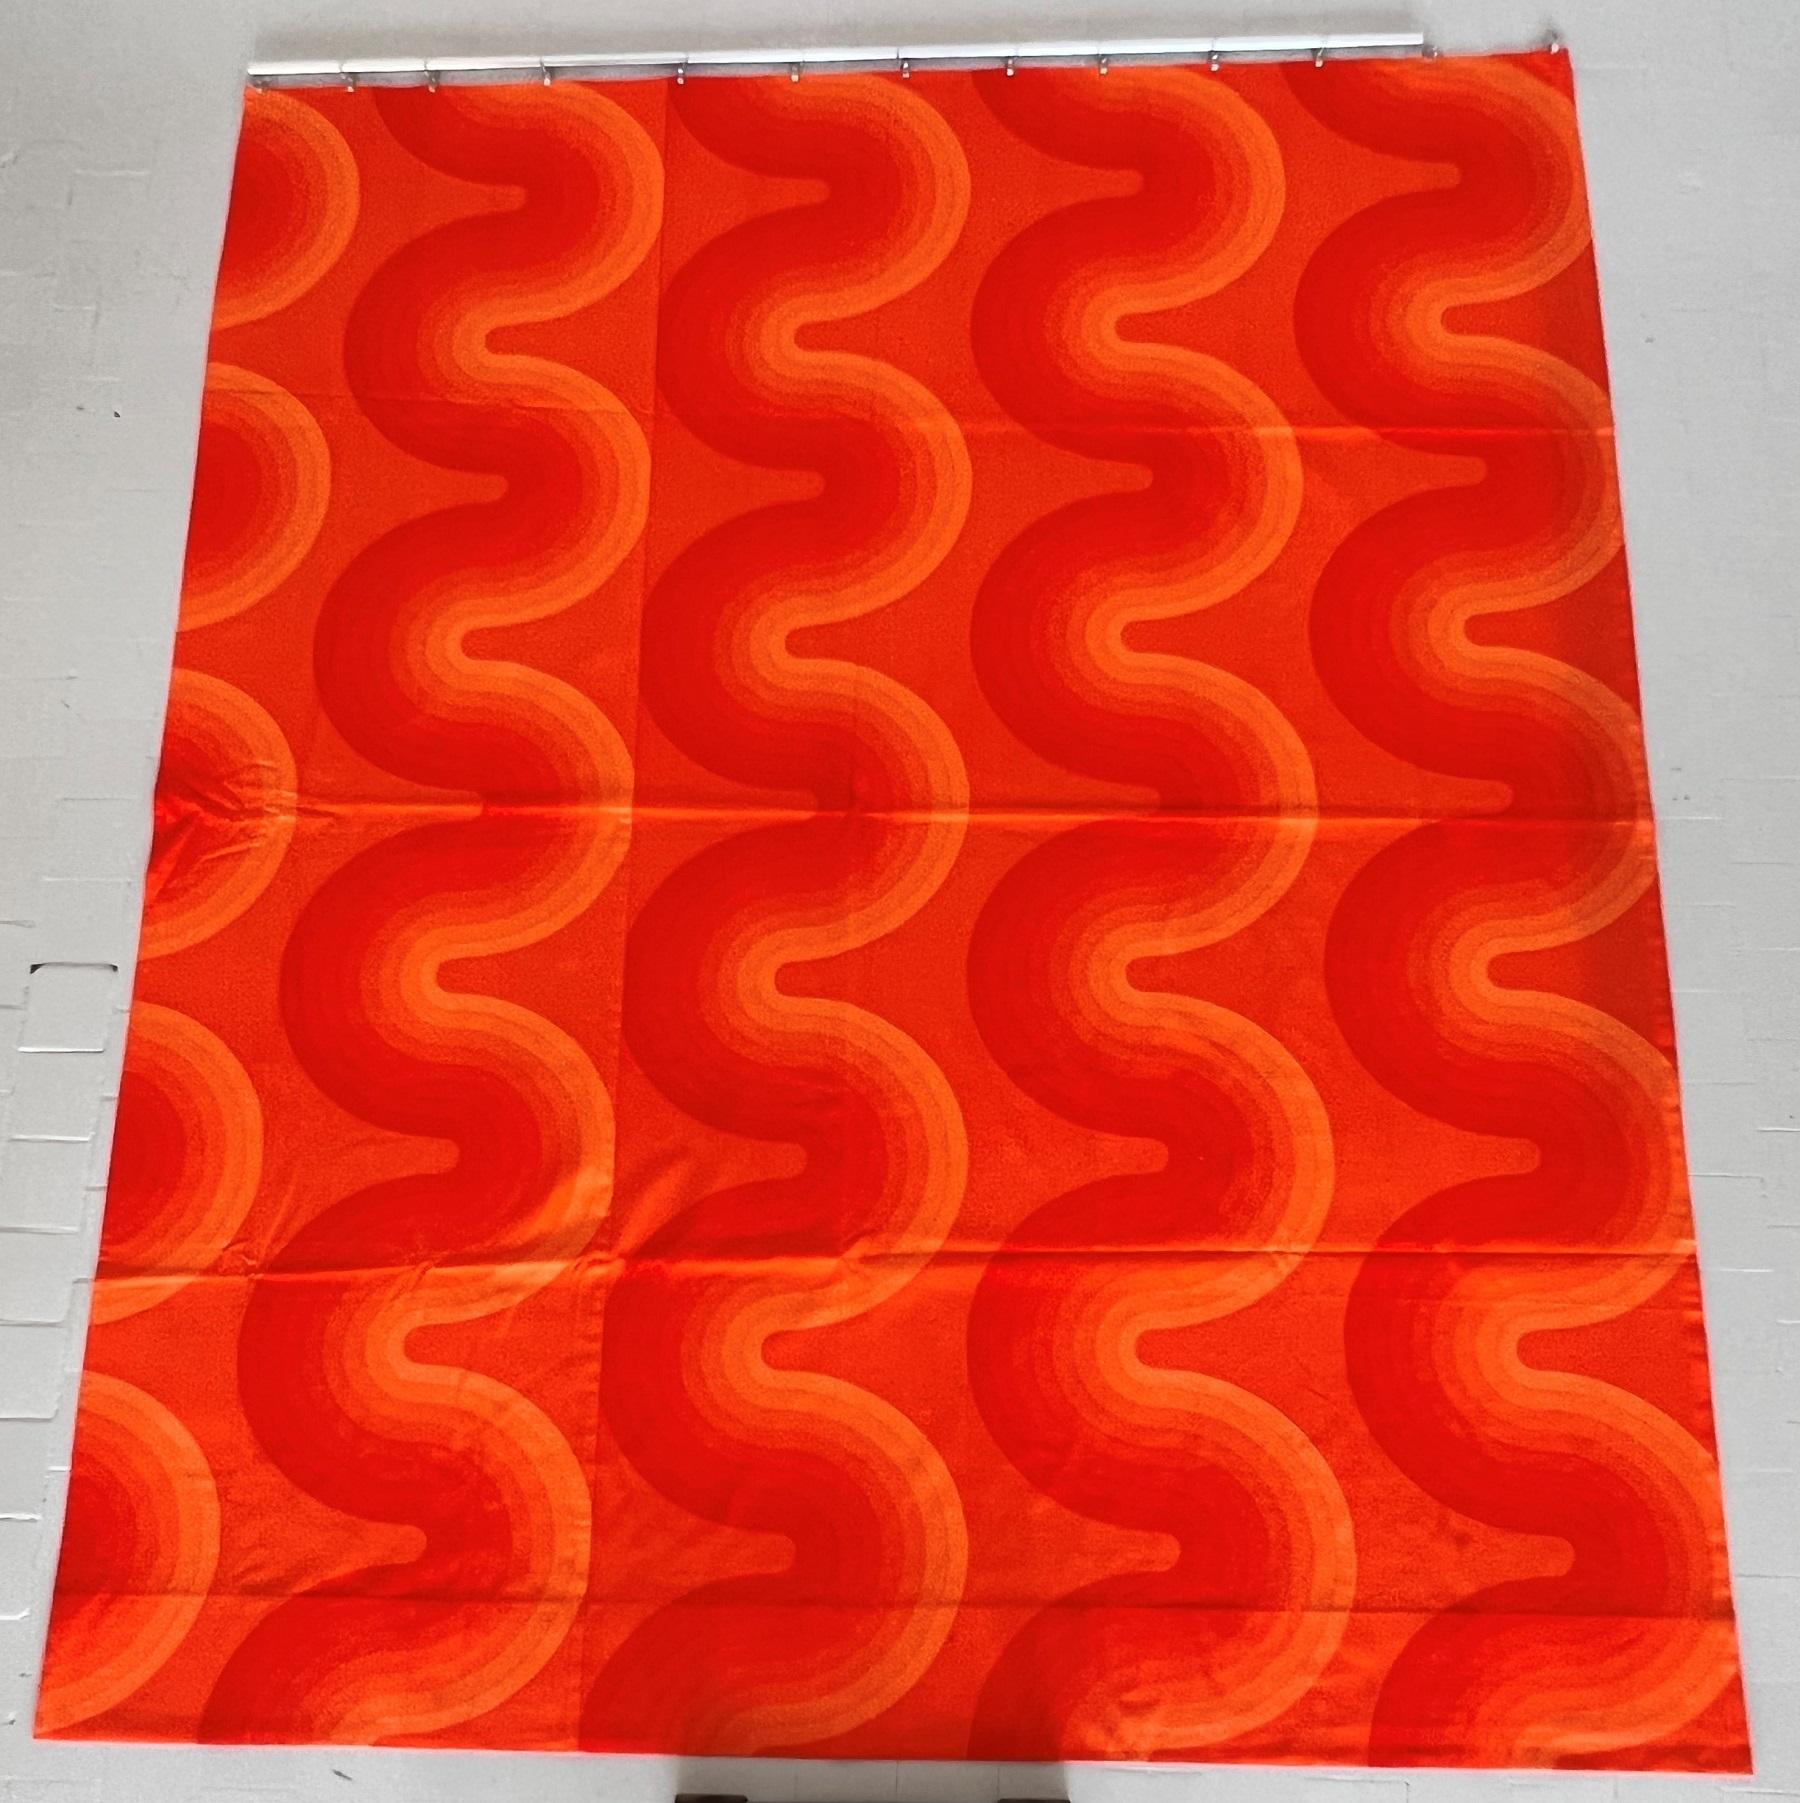 Verner Panton Original Fabric Panel Tapestry for Mira-X Collection, 1970s For Sale 3